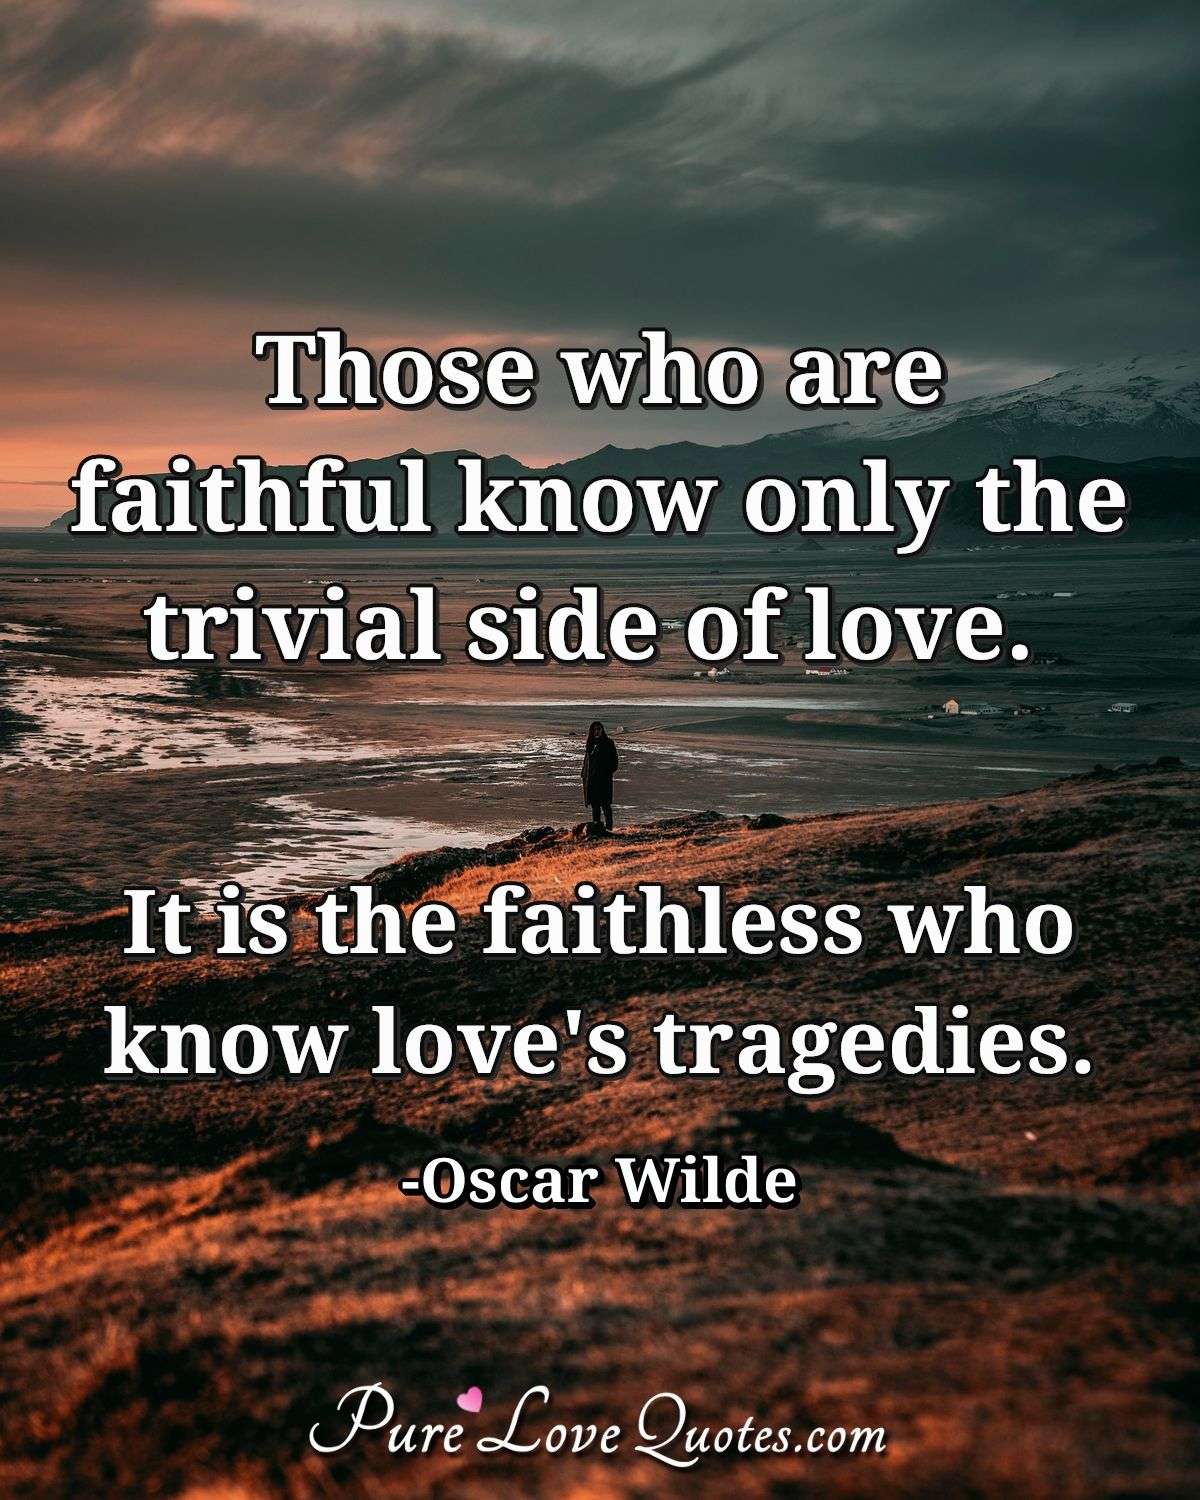 Those who are faithful know only the trivial side of love. It is the faithless who know love's tragedies. - Oscar Wilde